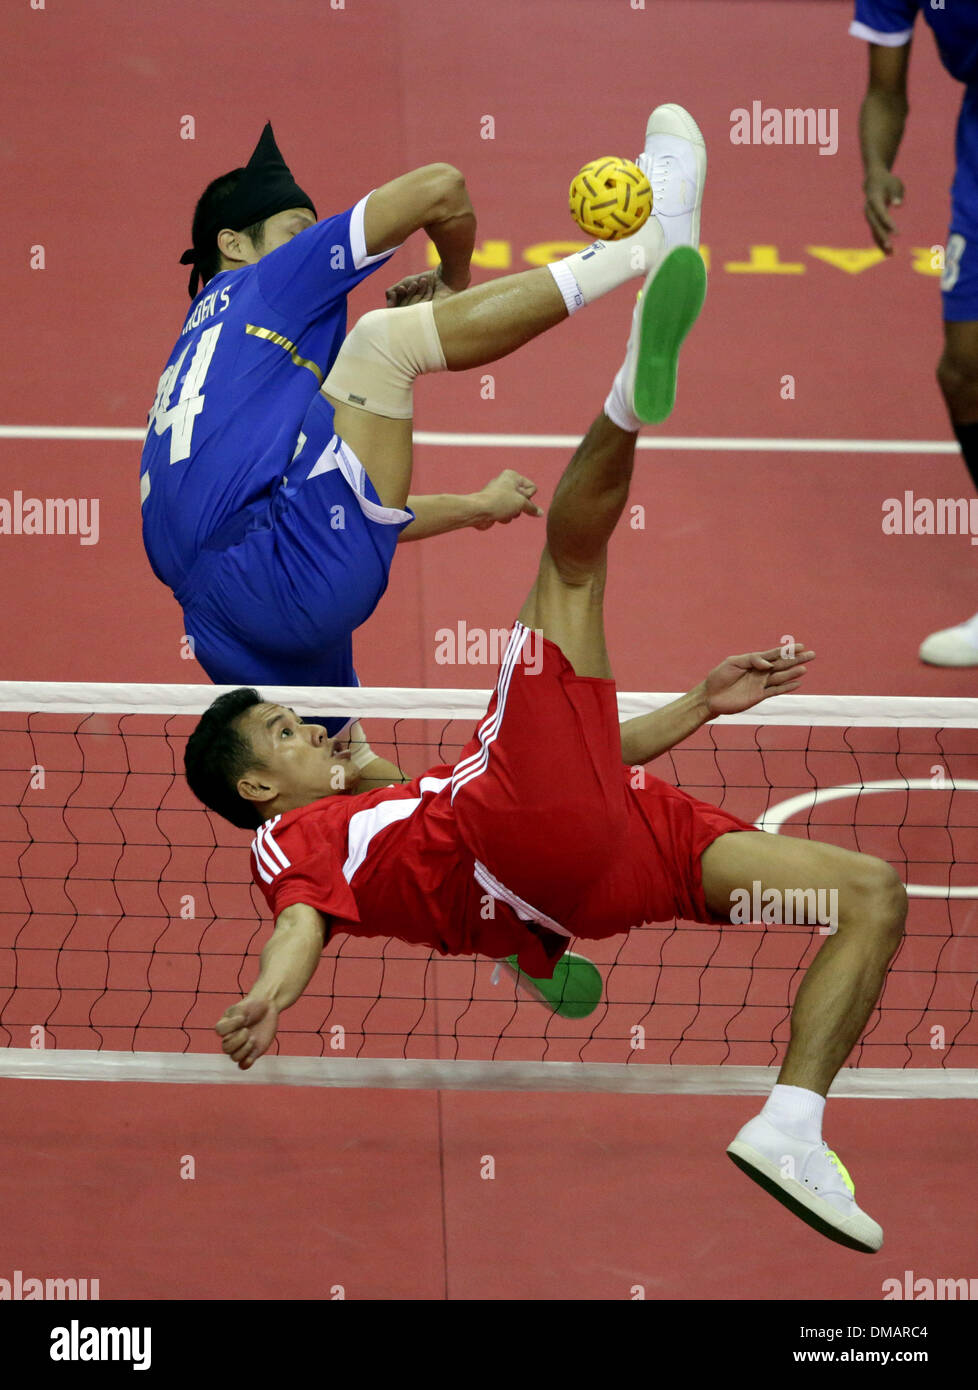 Nay Pyi Taw, Myanmar. 13th Dec, 2013. A player of Indonesia (front) hits a shot during the men's Sepak Takraw match between Thailand and Indonesia in the 27th Southeast Asian (SEA) Games in Nay Pyi Taw, Myanmar, Dec. 12, 2013. © U Aung/Xinhua/Alamy Live News Stock Photo